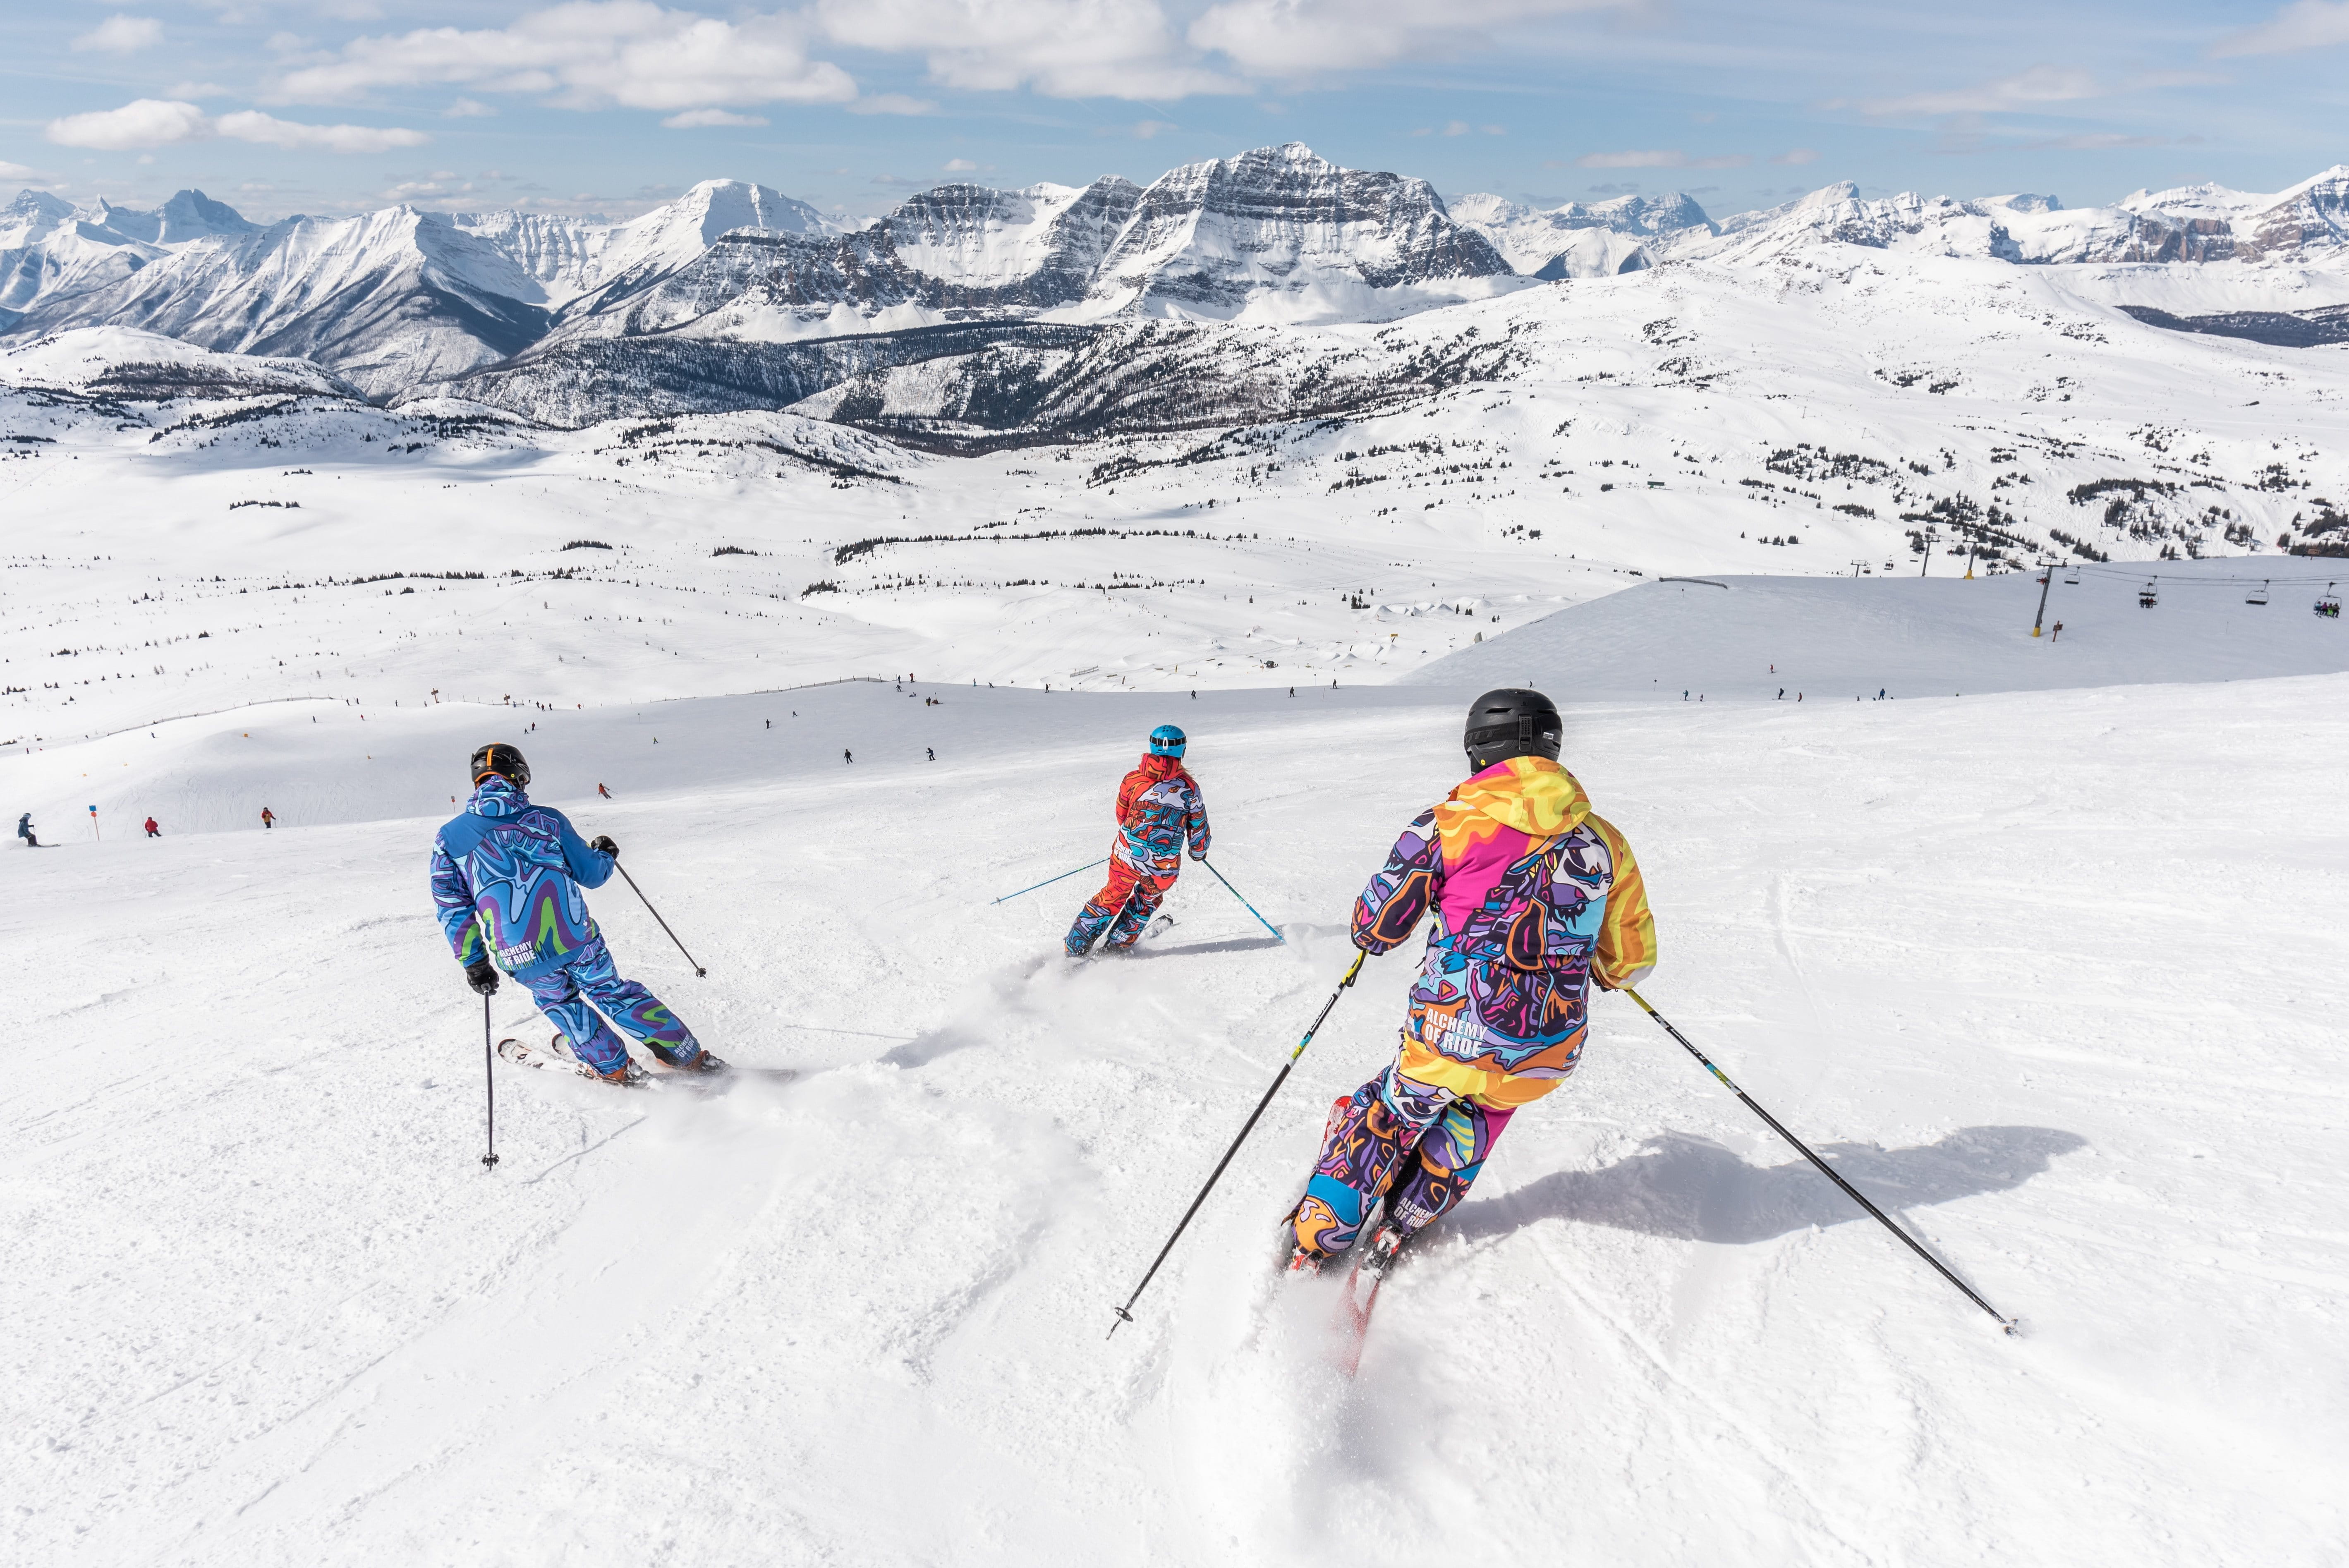 three skiers on a mountain, avoiding ice burns by wearing appropriate clothing